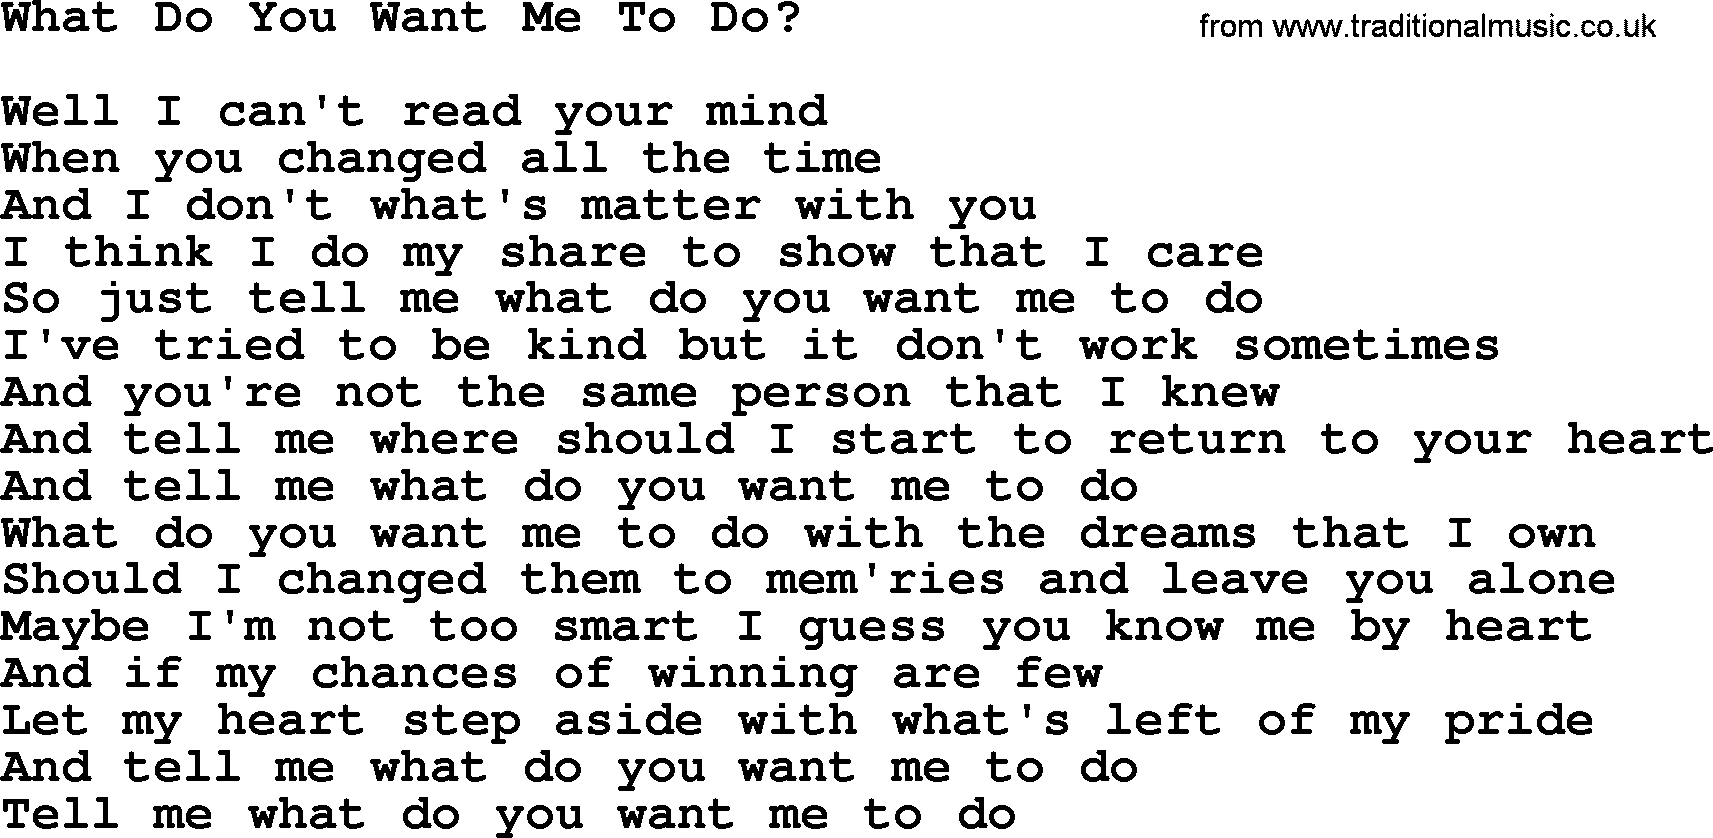 Willie Nelson song: What Do You Want Me To Do lyrics